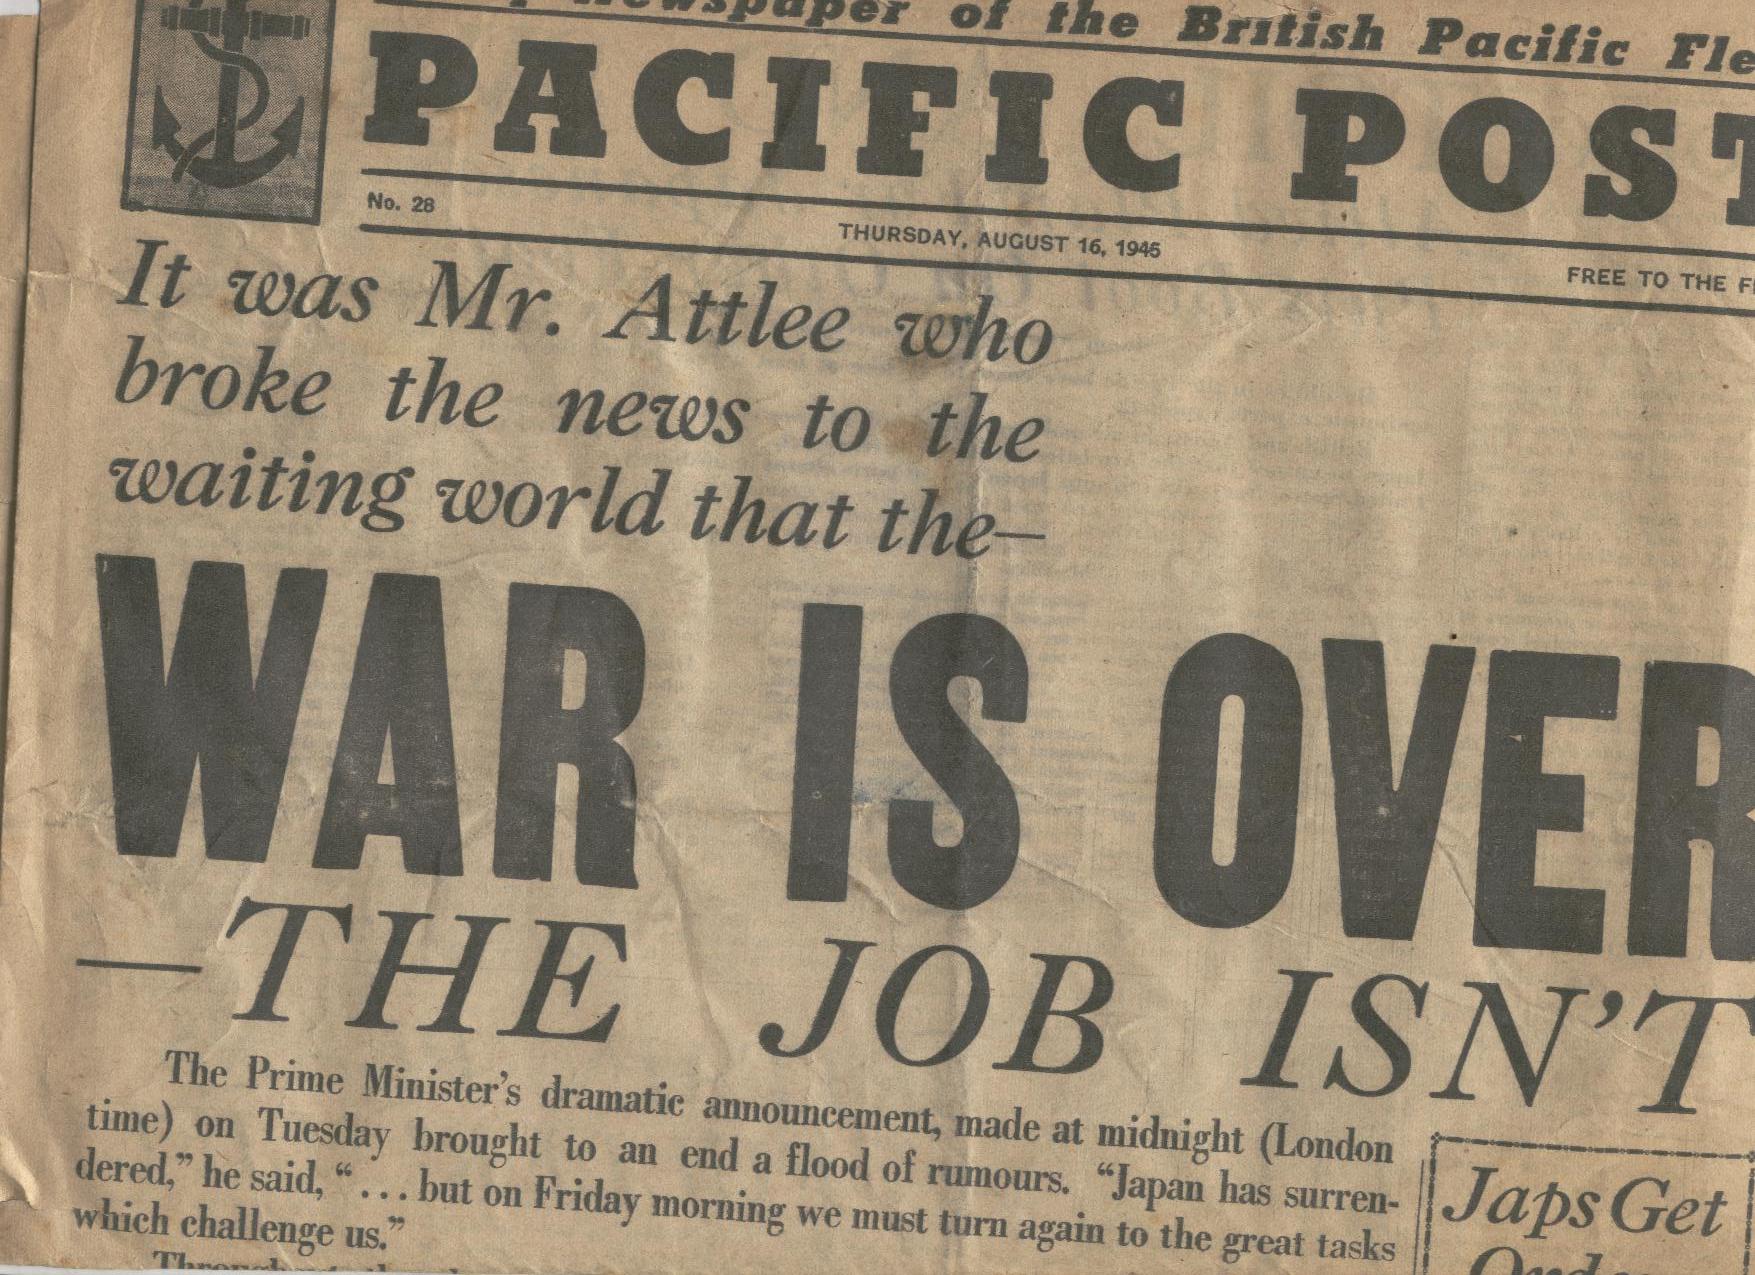 WWII ? Japanese Surrender copy of the Pacific Post^ the Daily Newspaper of the British Pacific